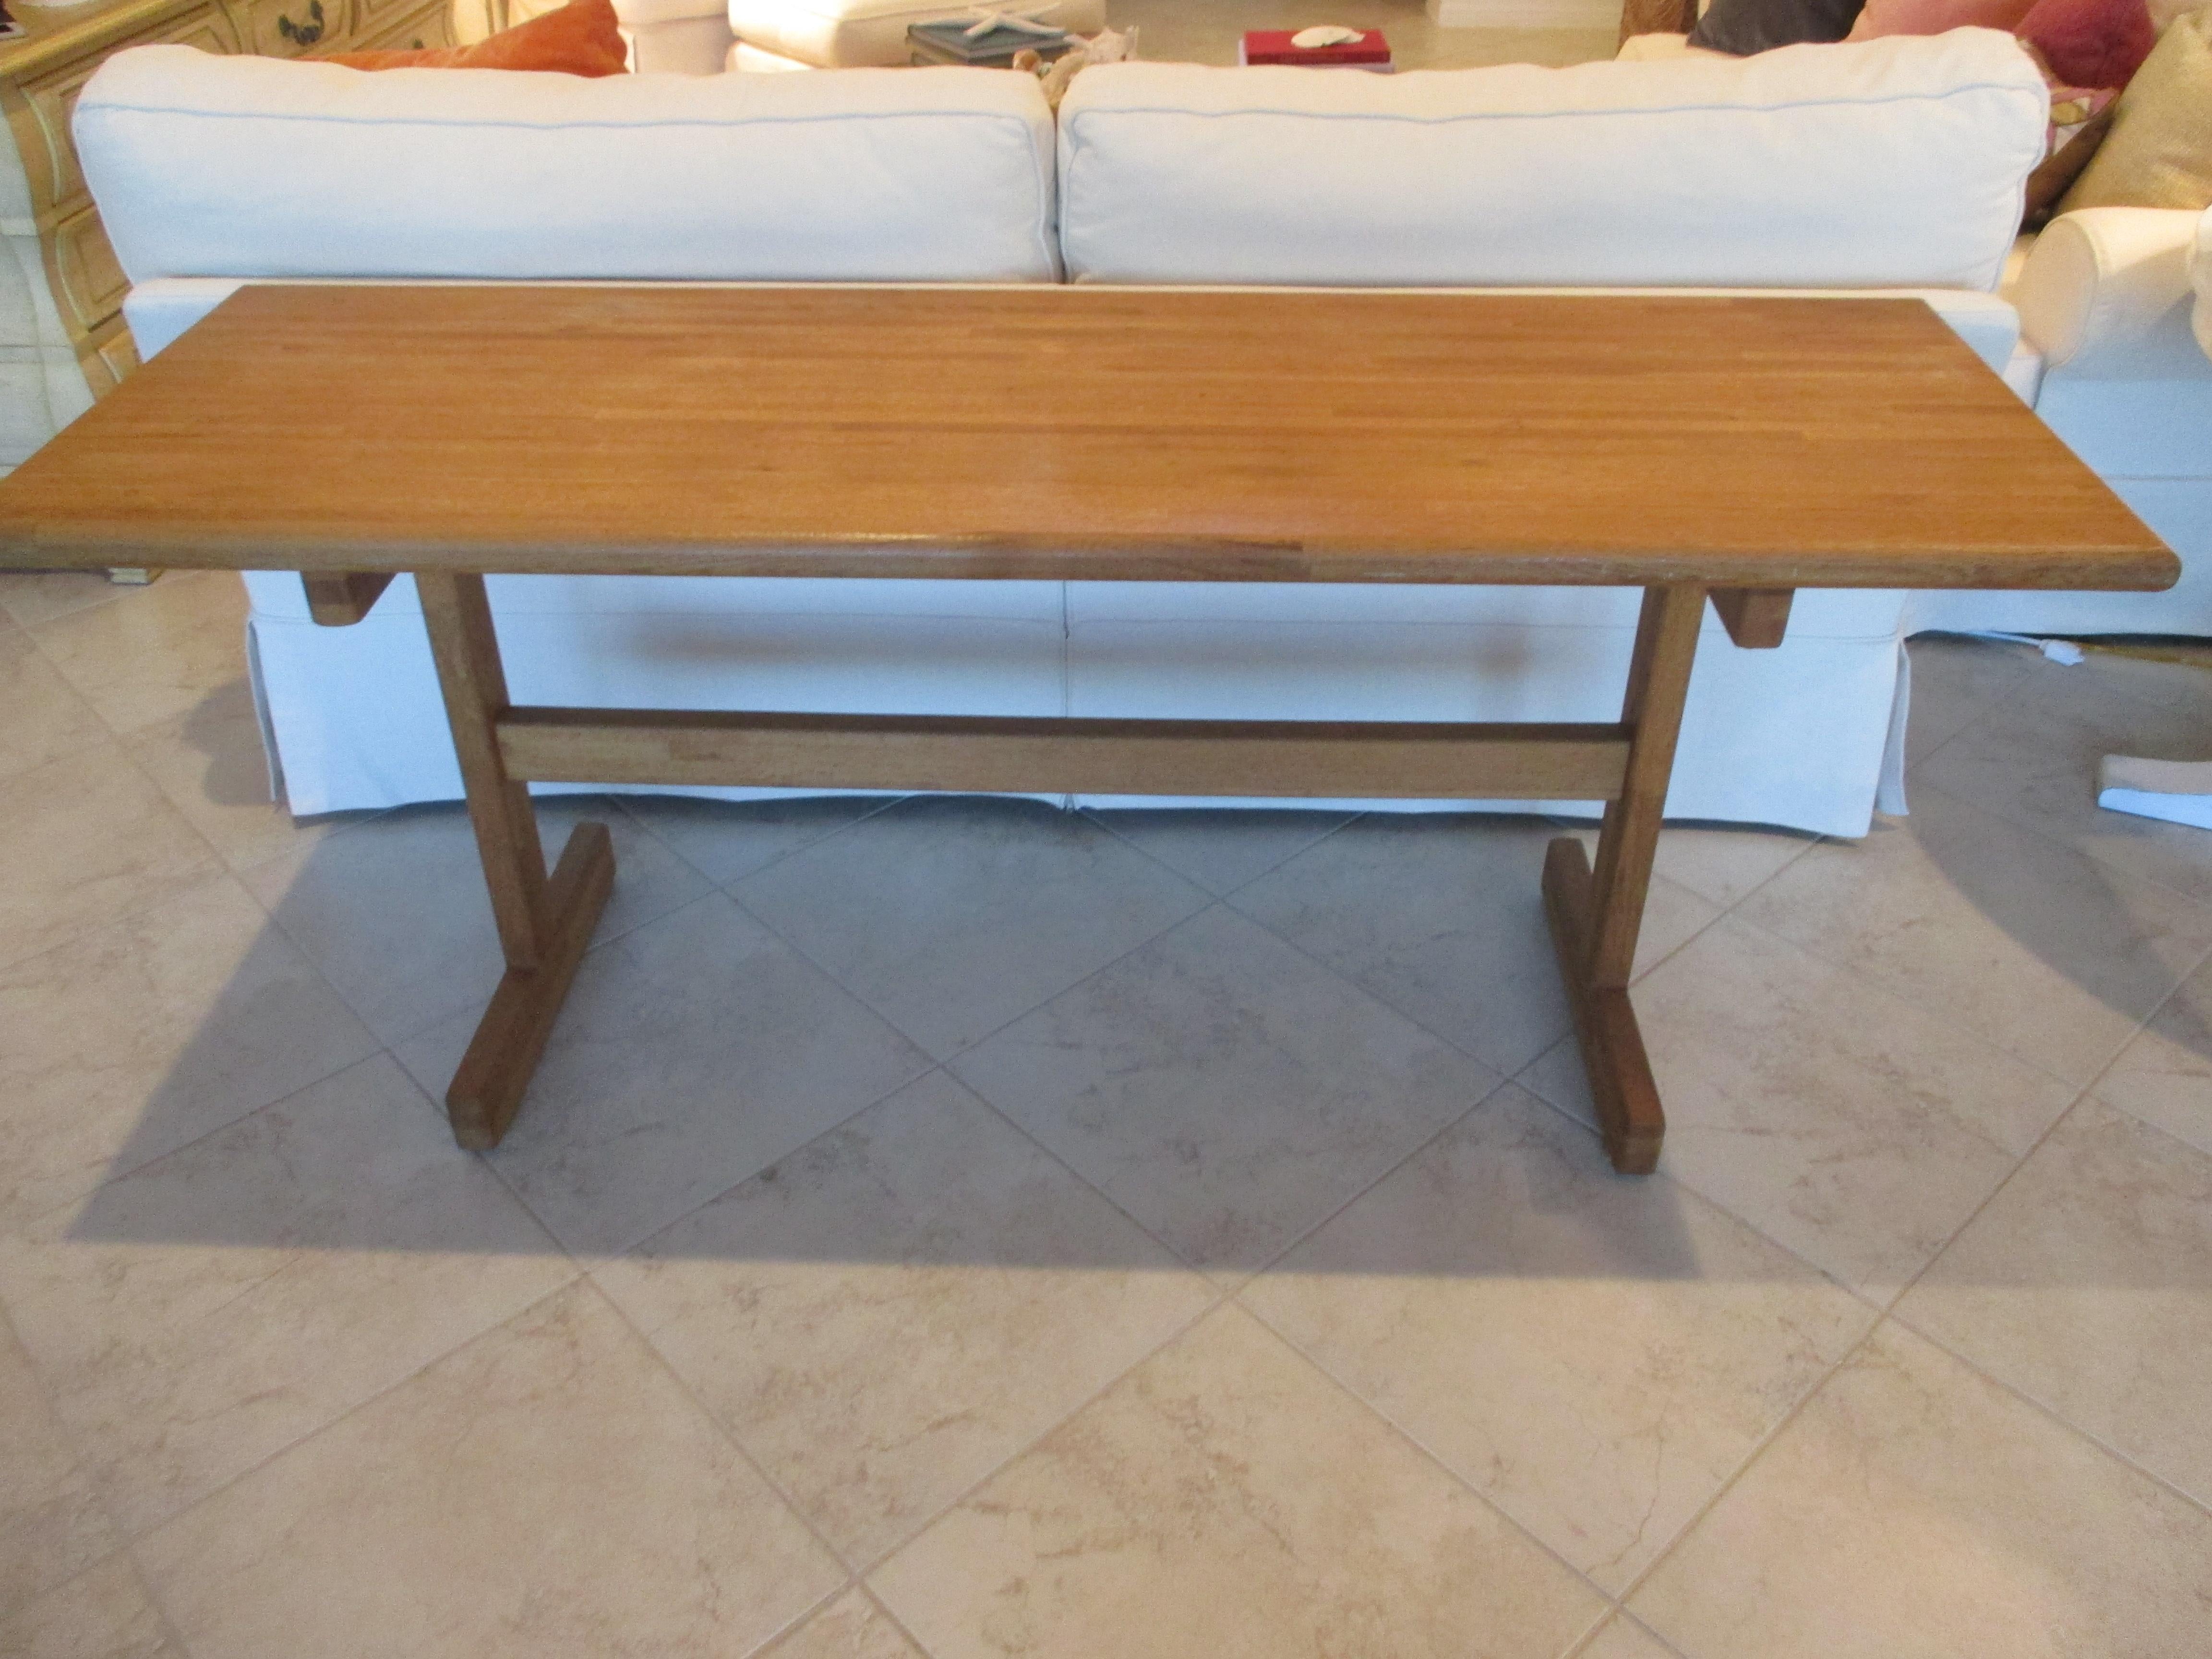 Vintage wood butcher block console with rounded edges and a natural finish. Top measures 1.5